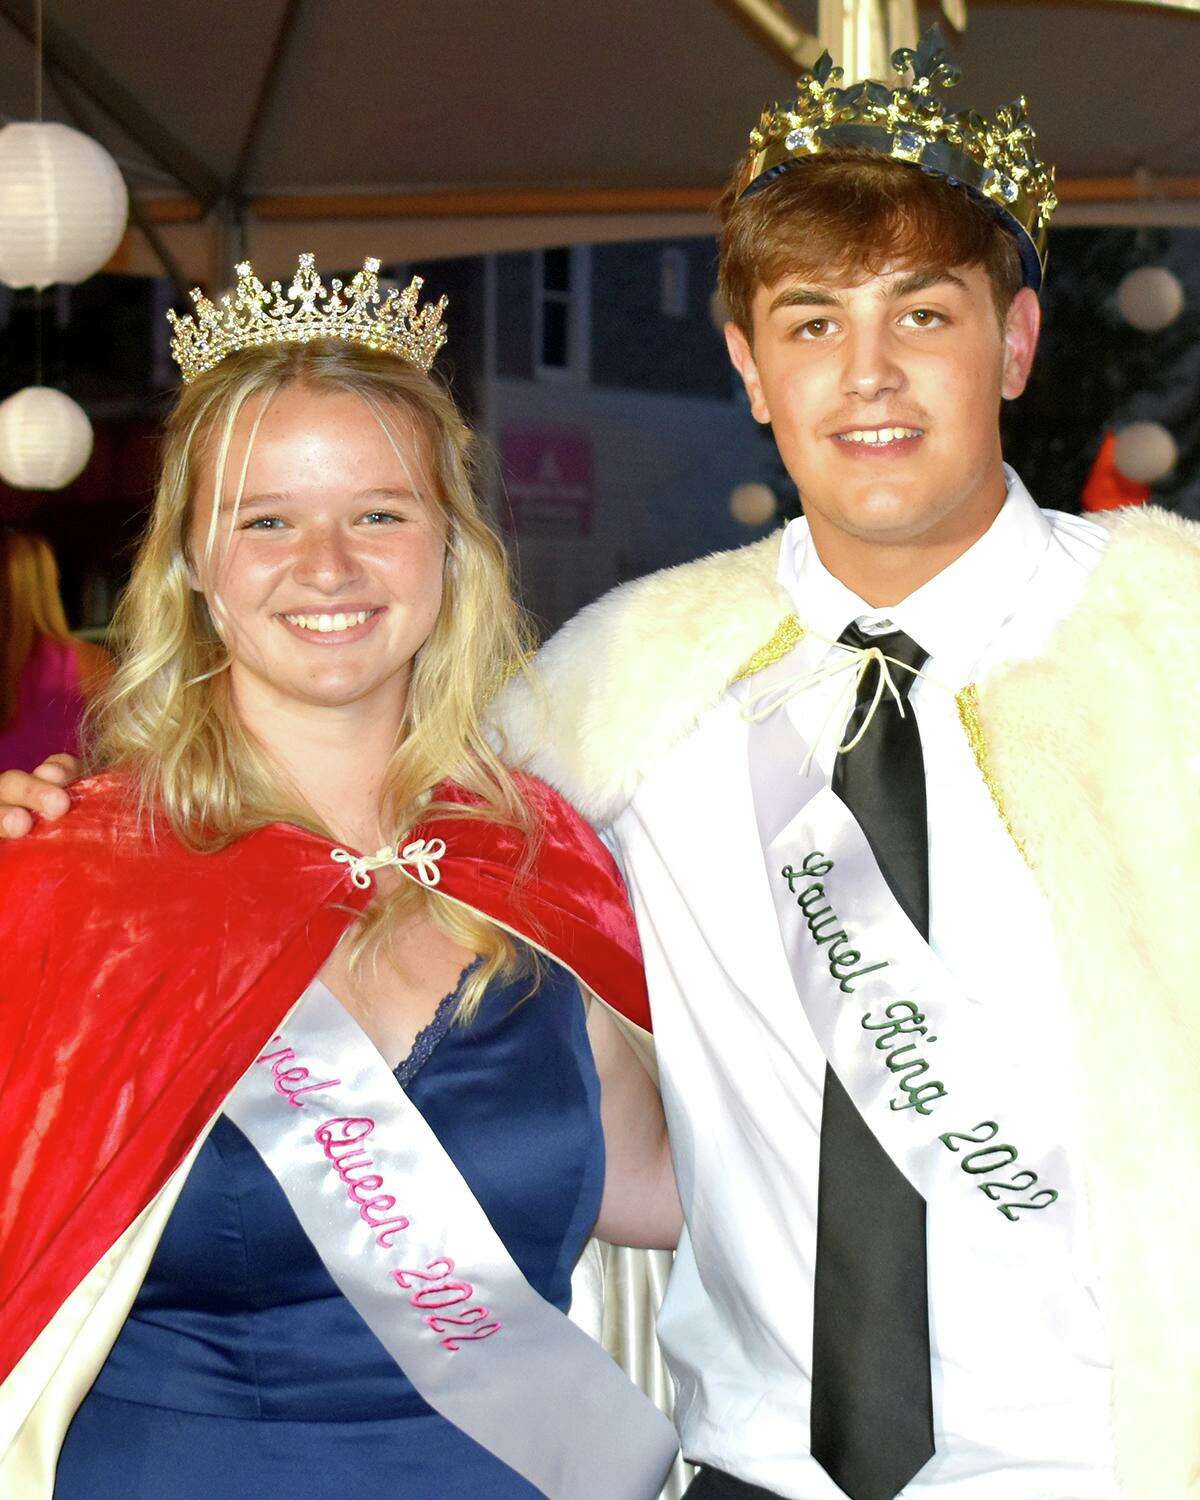 The Laurel Fesival in Winsted wrapped up with a Laurel Ball and crowning of this year's Laurel Queen and King. The event was held Saturday June 4, 2022 at East End Park. Pictured are 2022 Laurel Queen and King Caitlyn Tucker and Aiden Bunel.